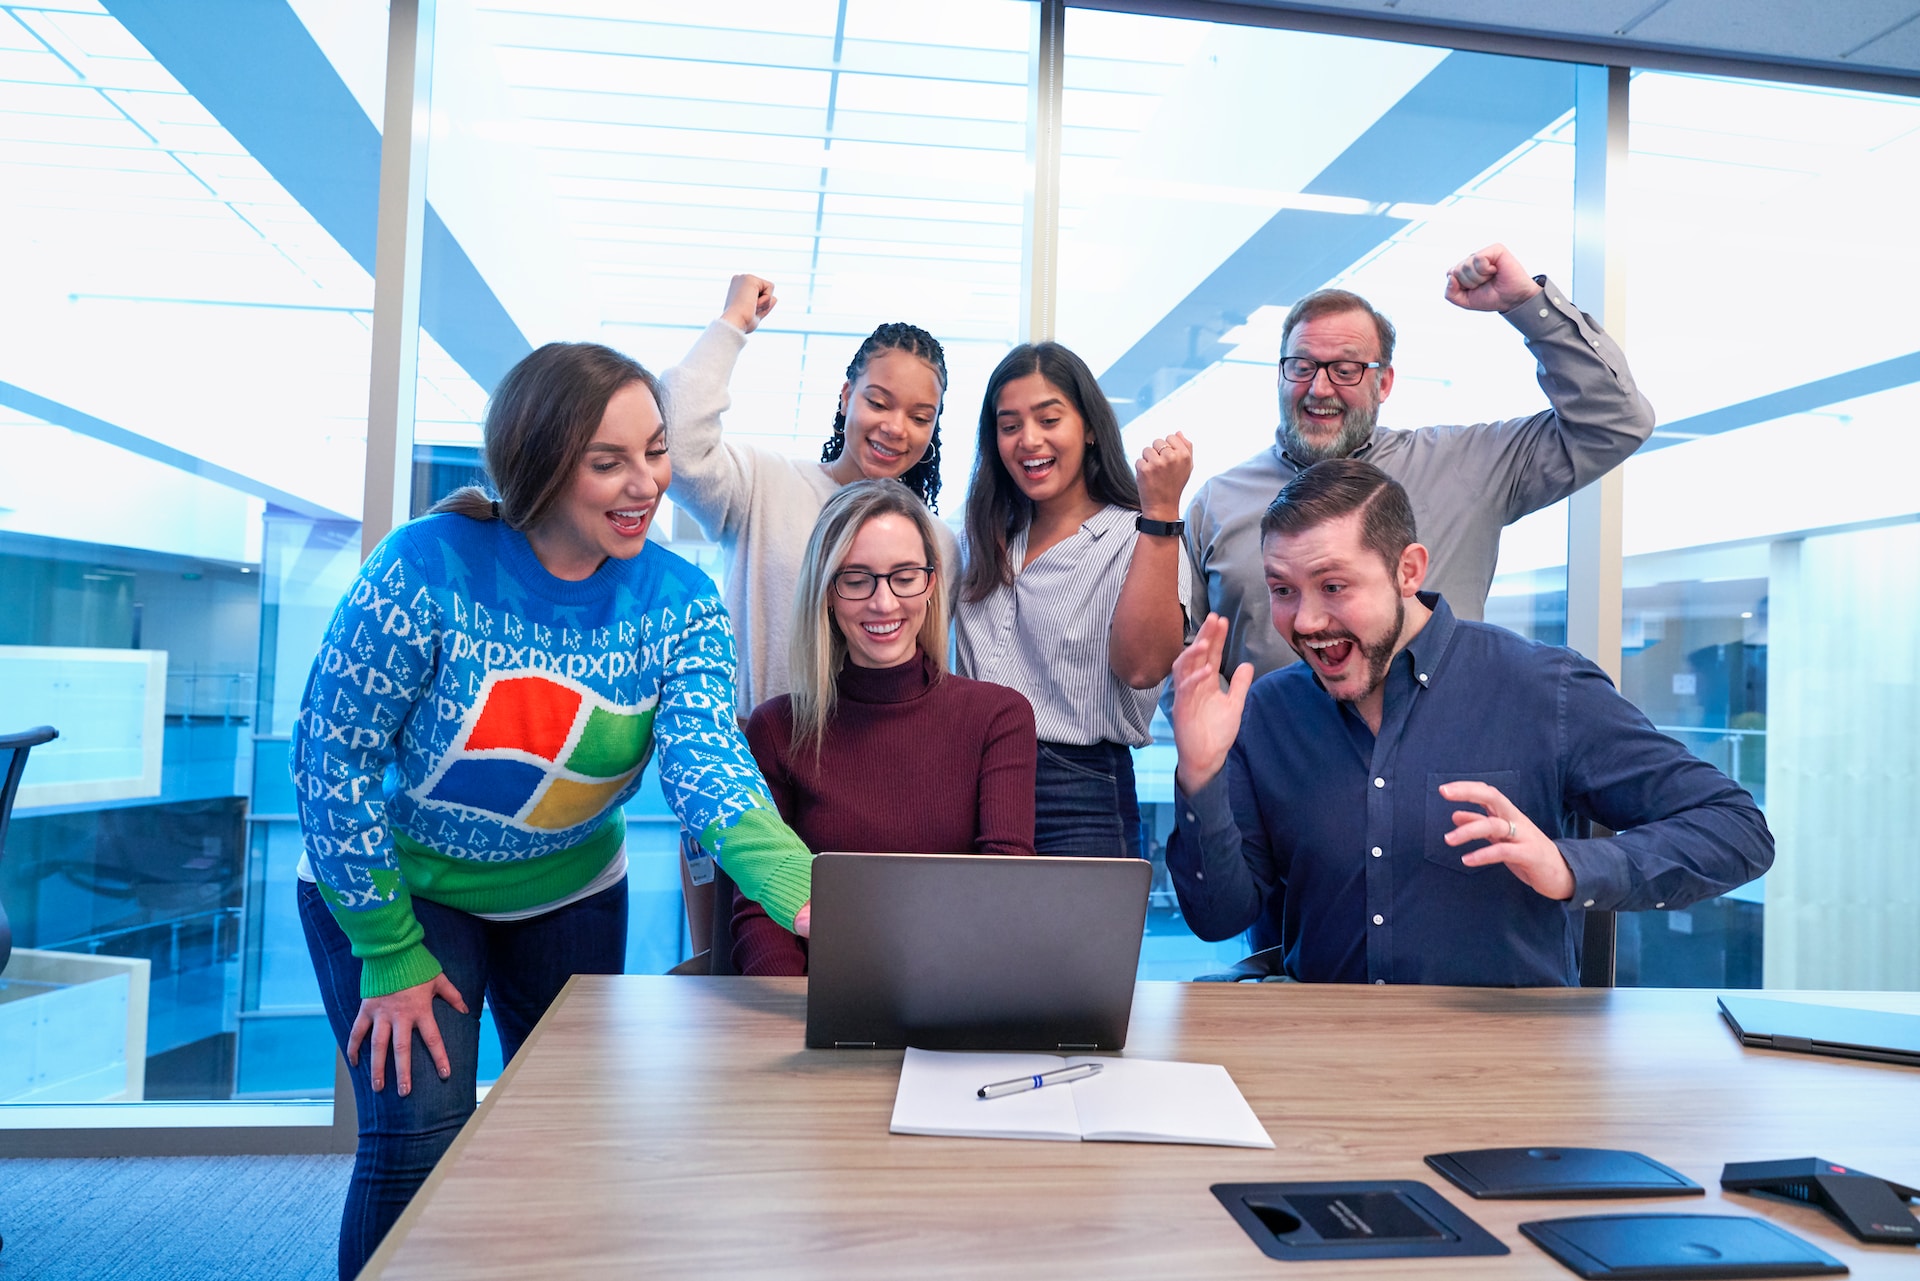 Group of colleagues celebrating around a laptop in an office. 